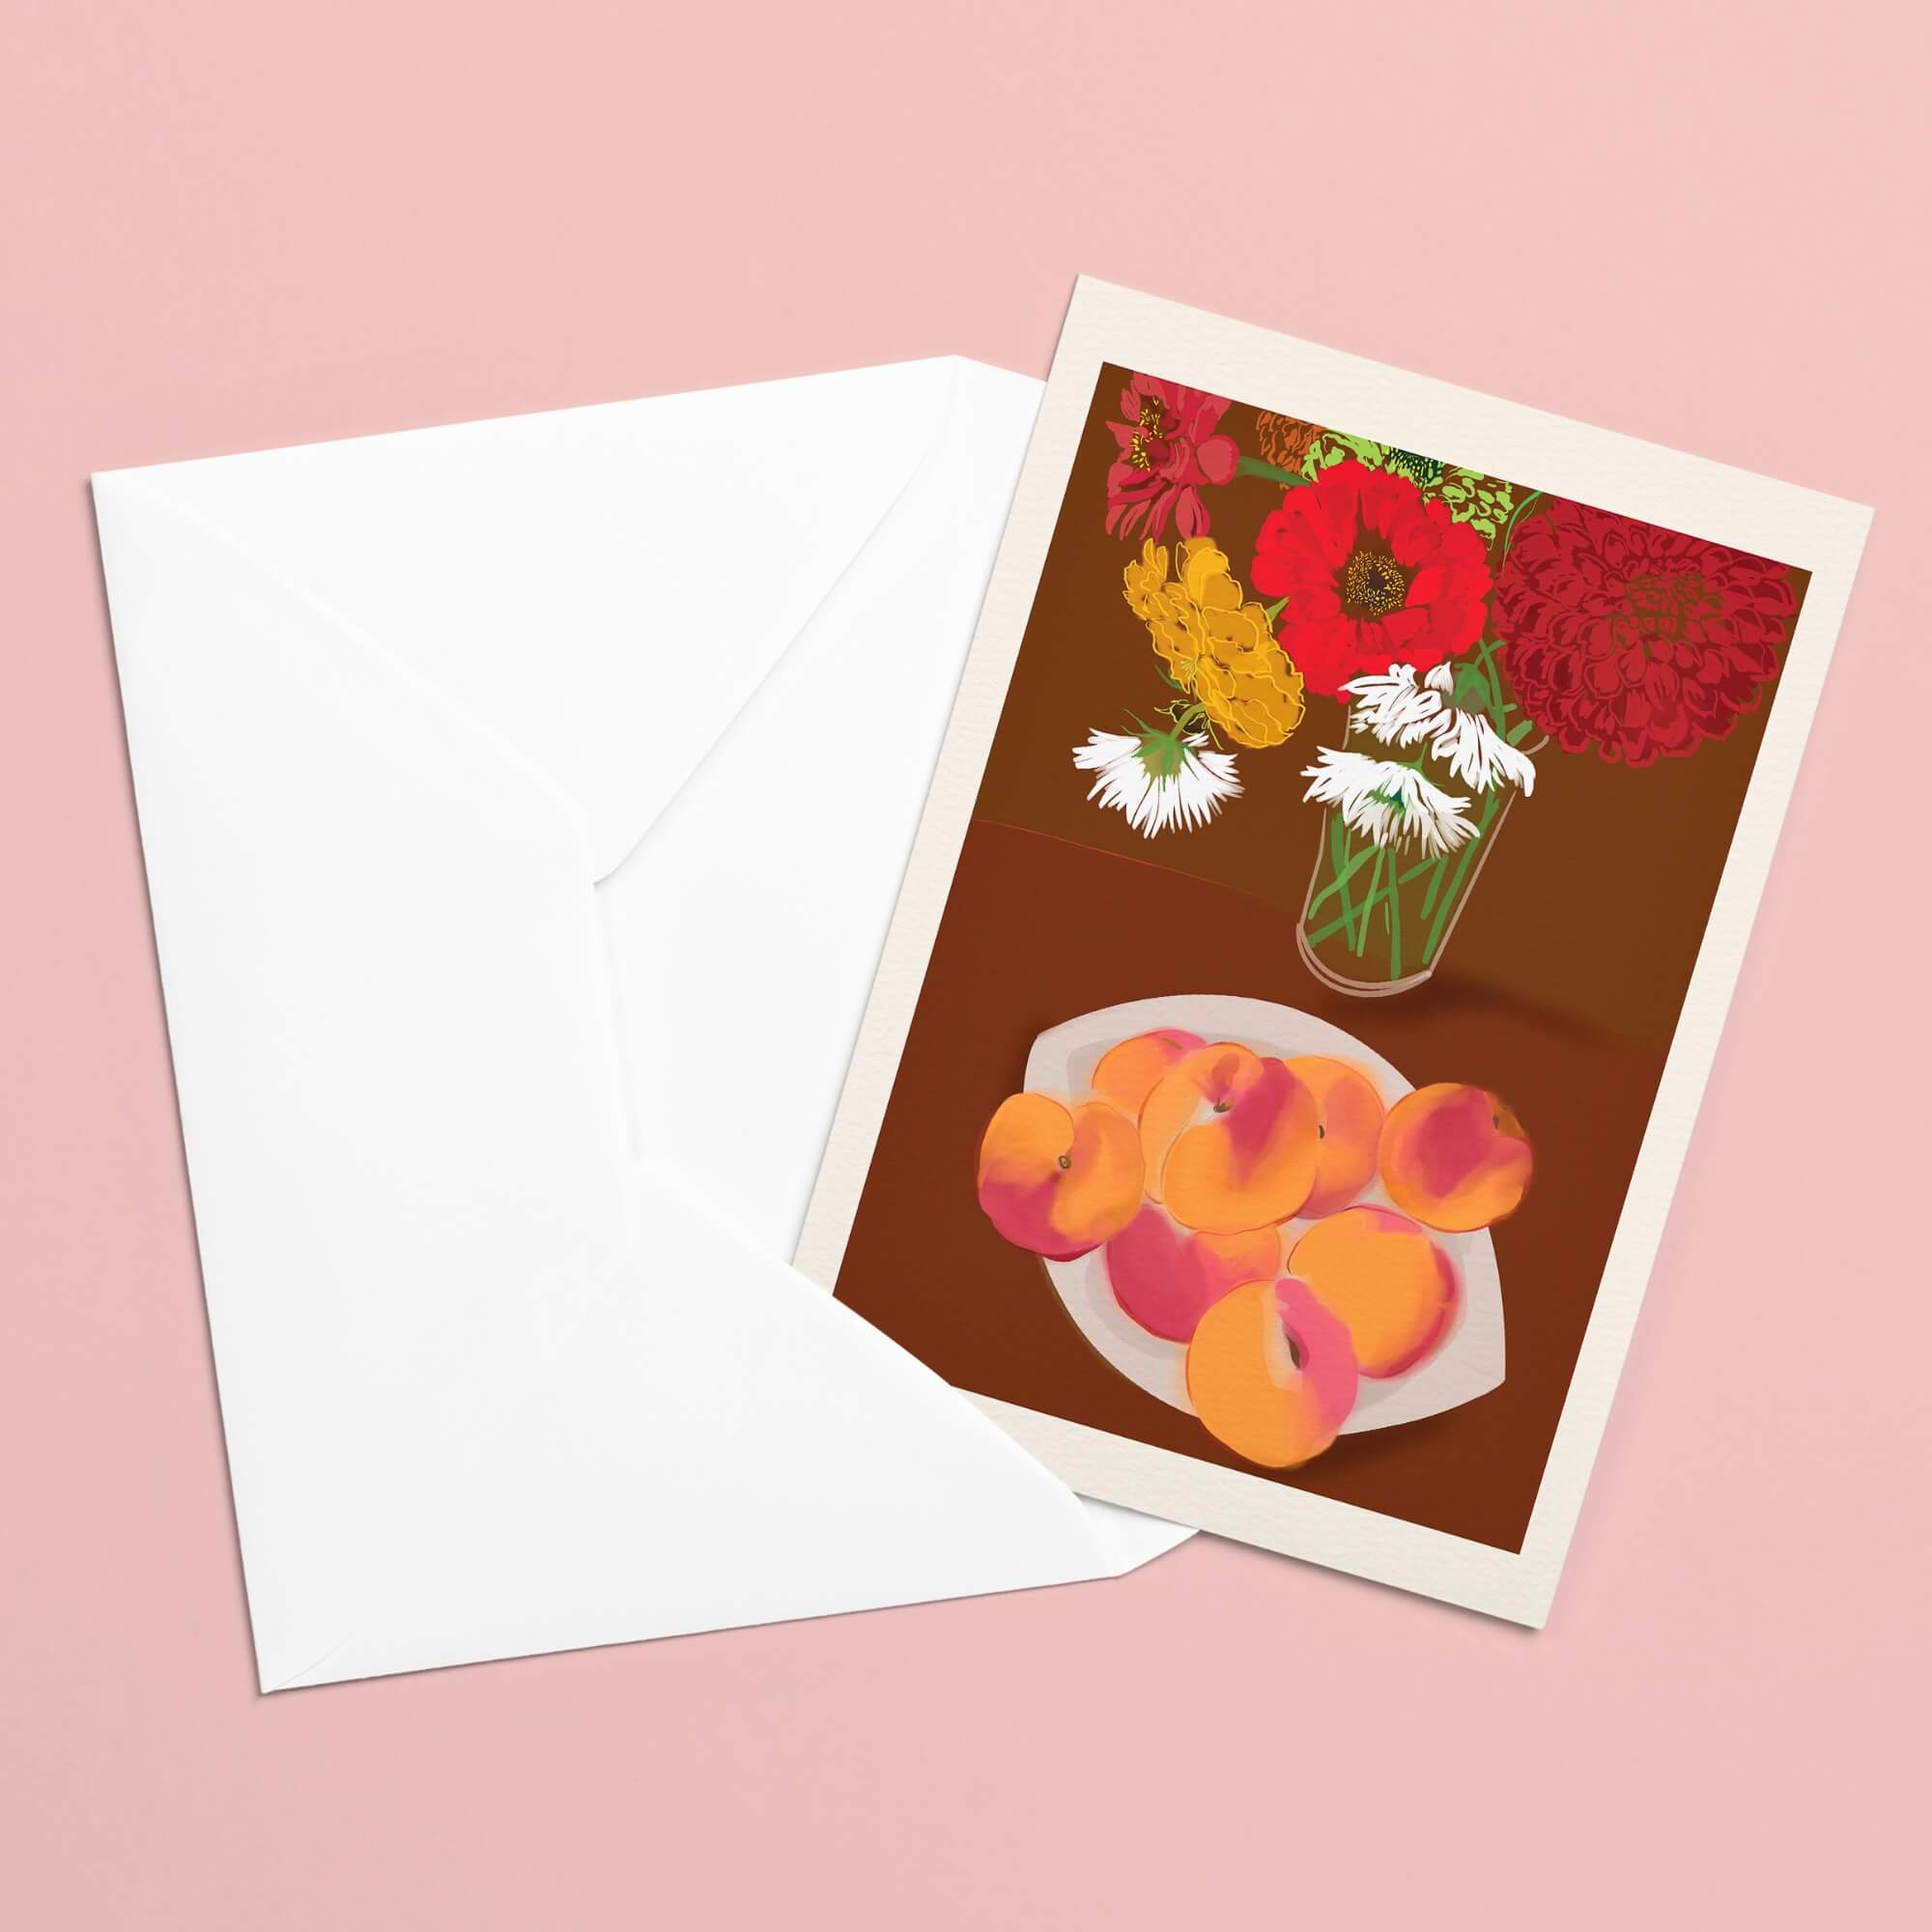 FLORA editions Art Cards for Flower Lovers by Catherine Toews